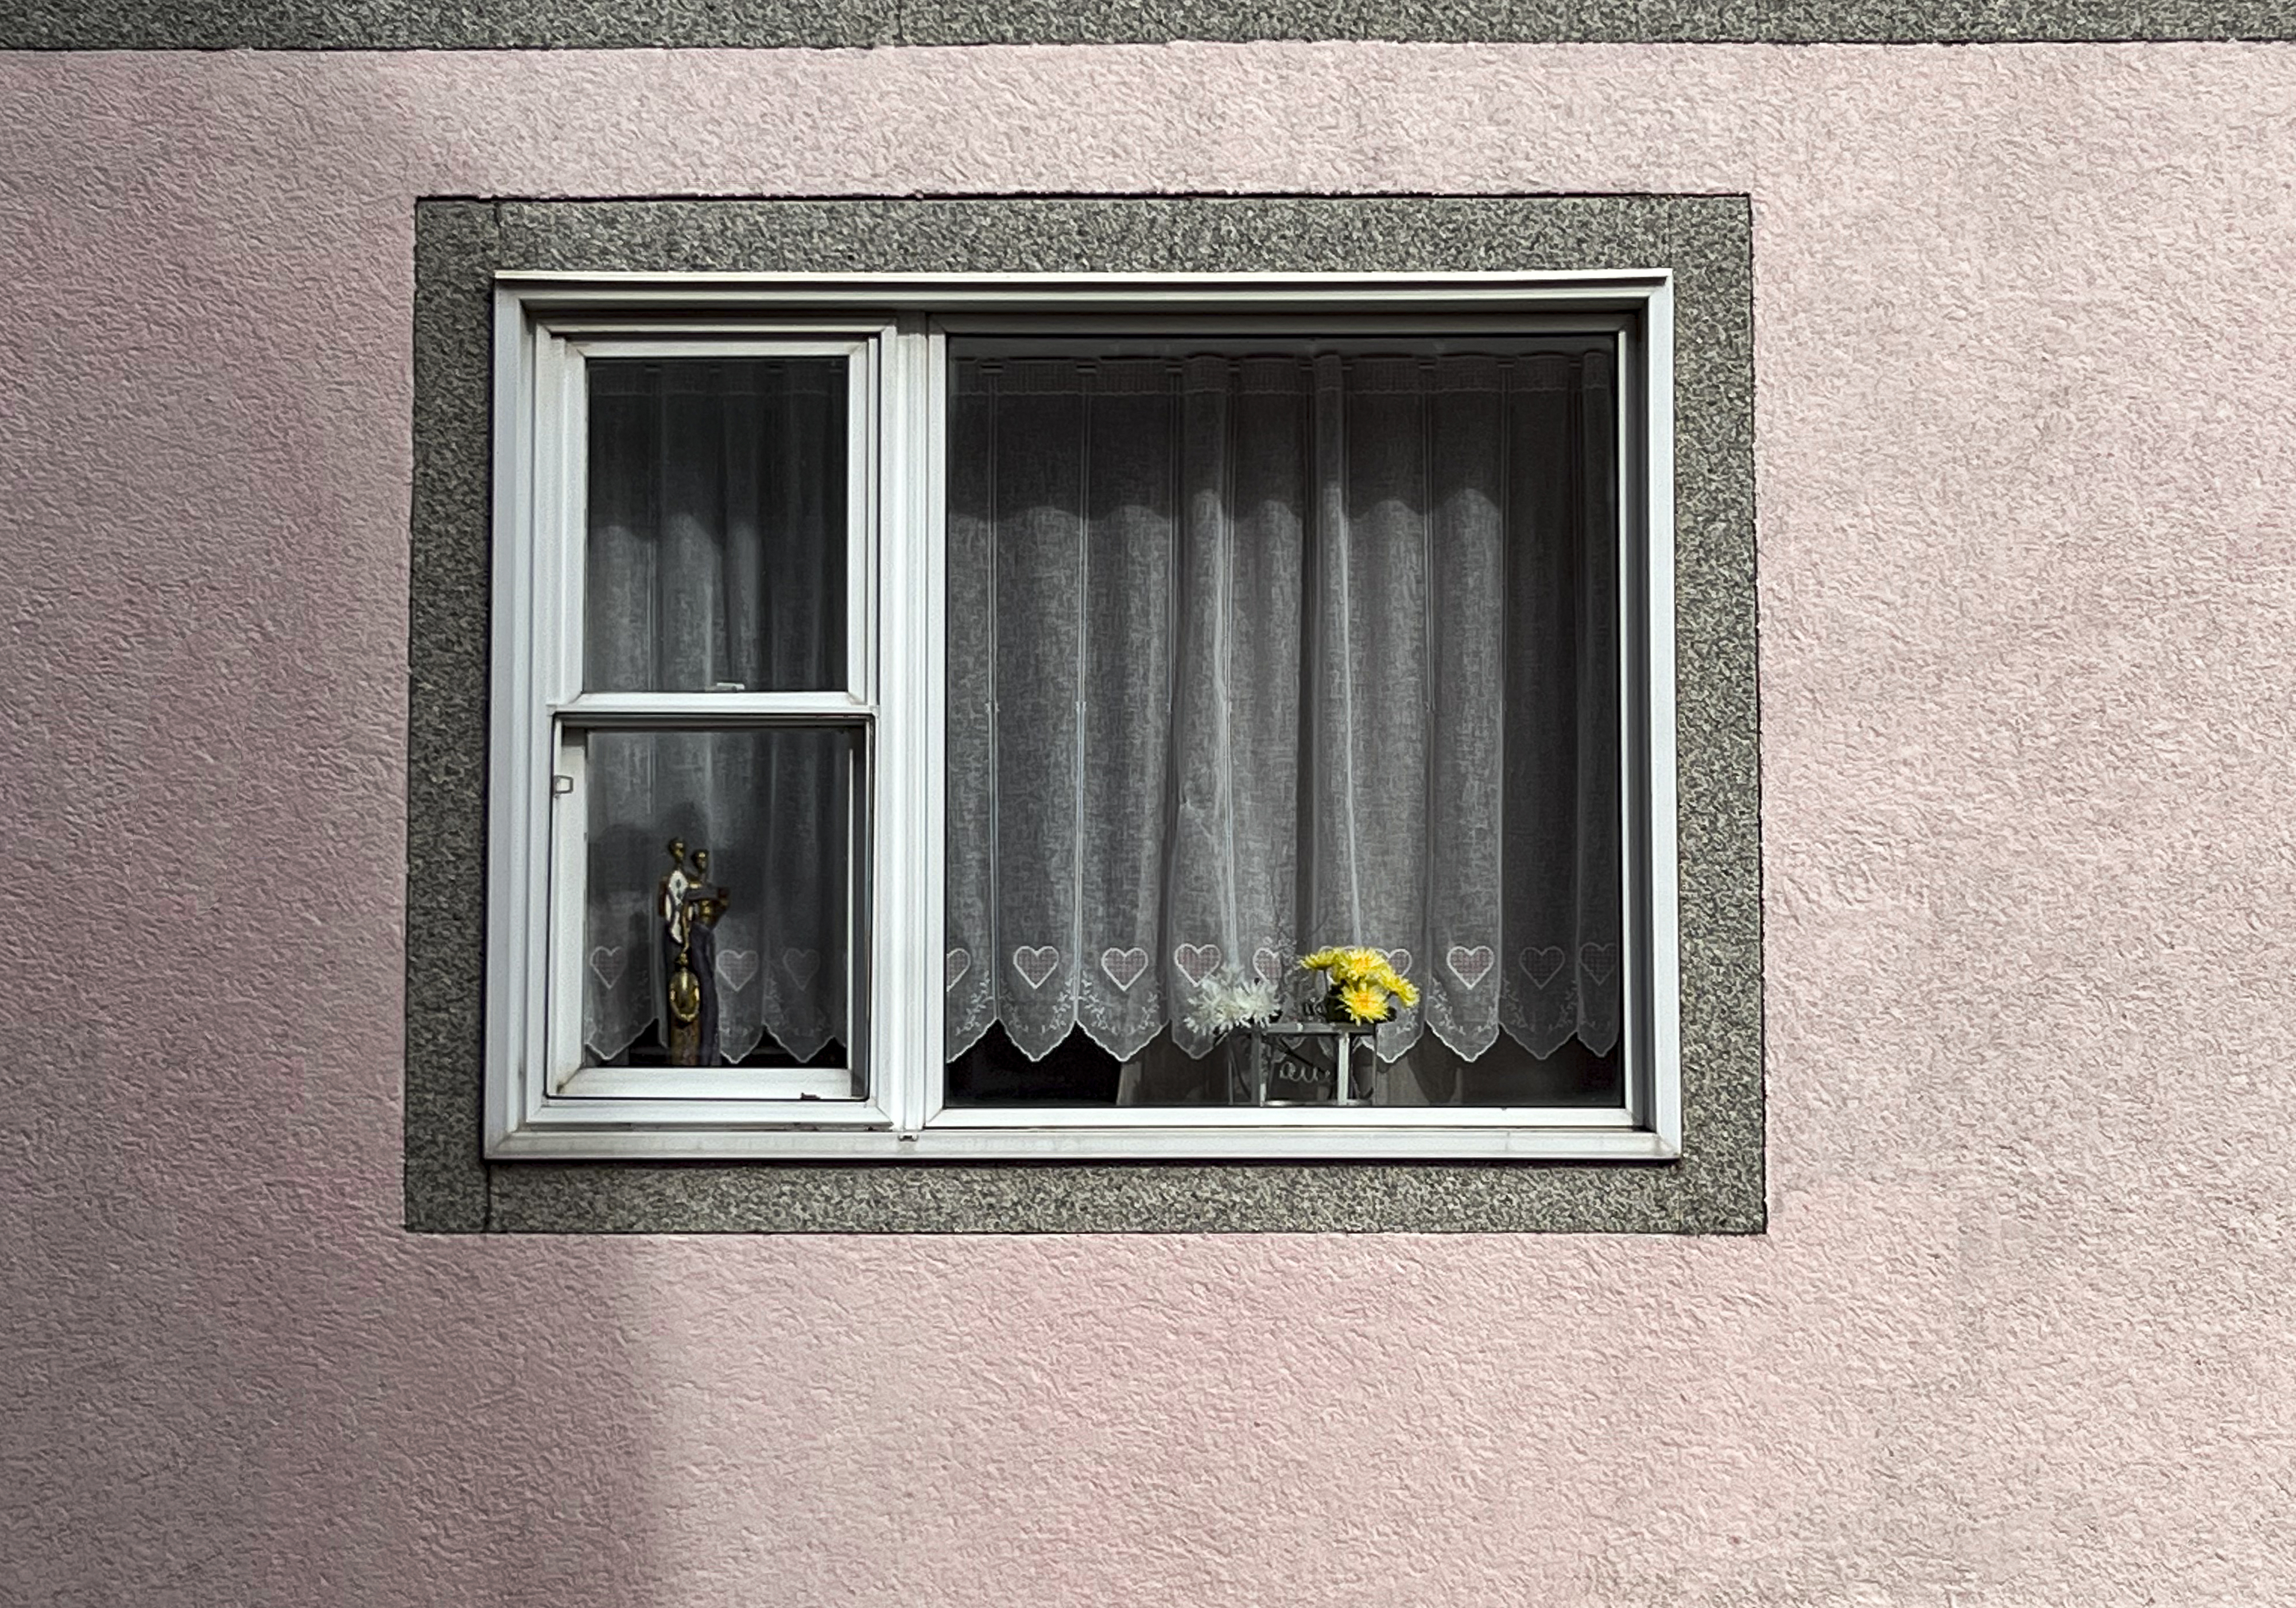 a singular small window with the curtain drawn